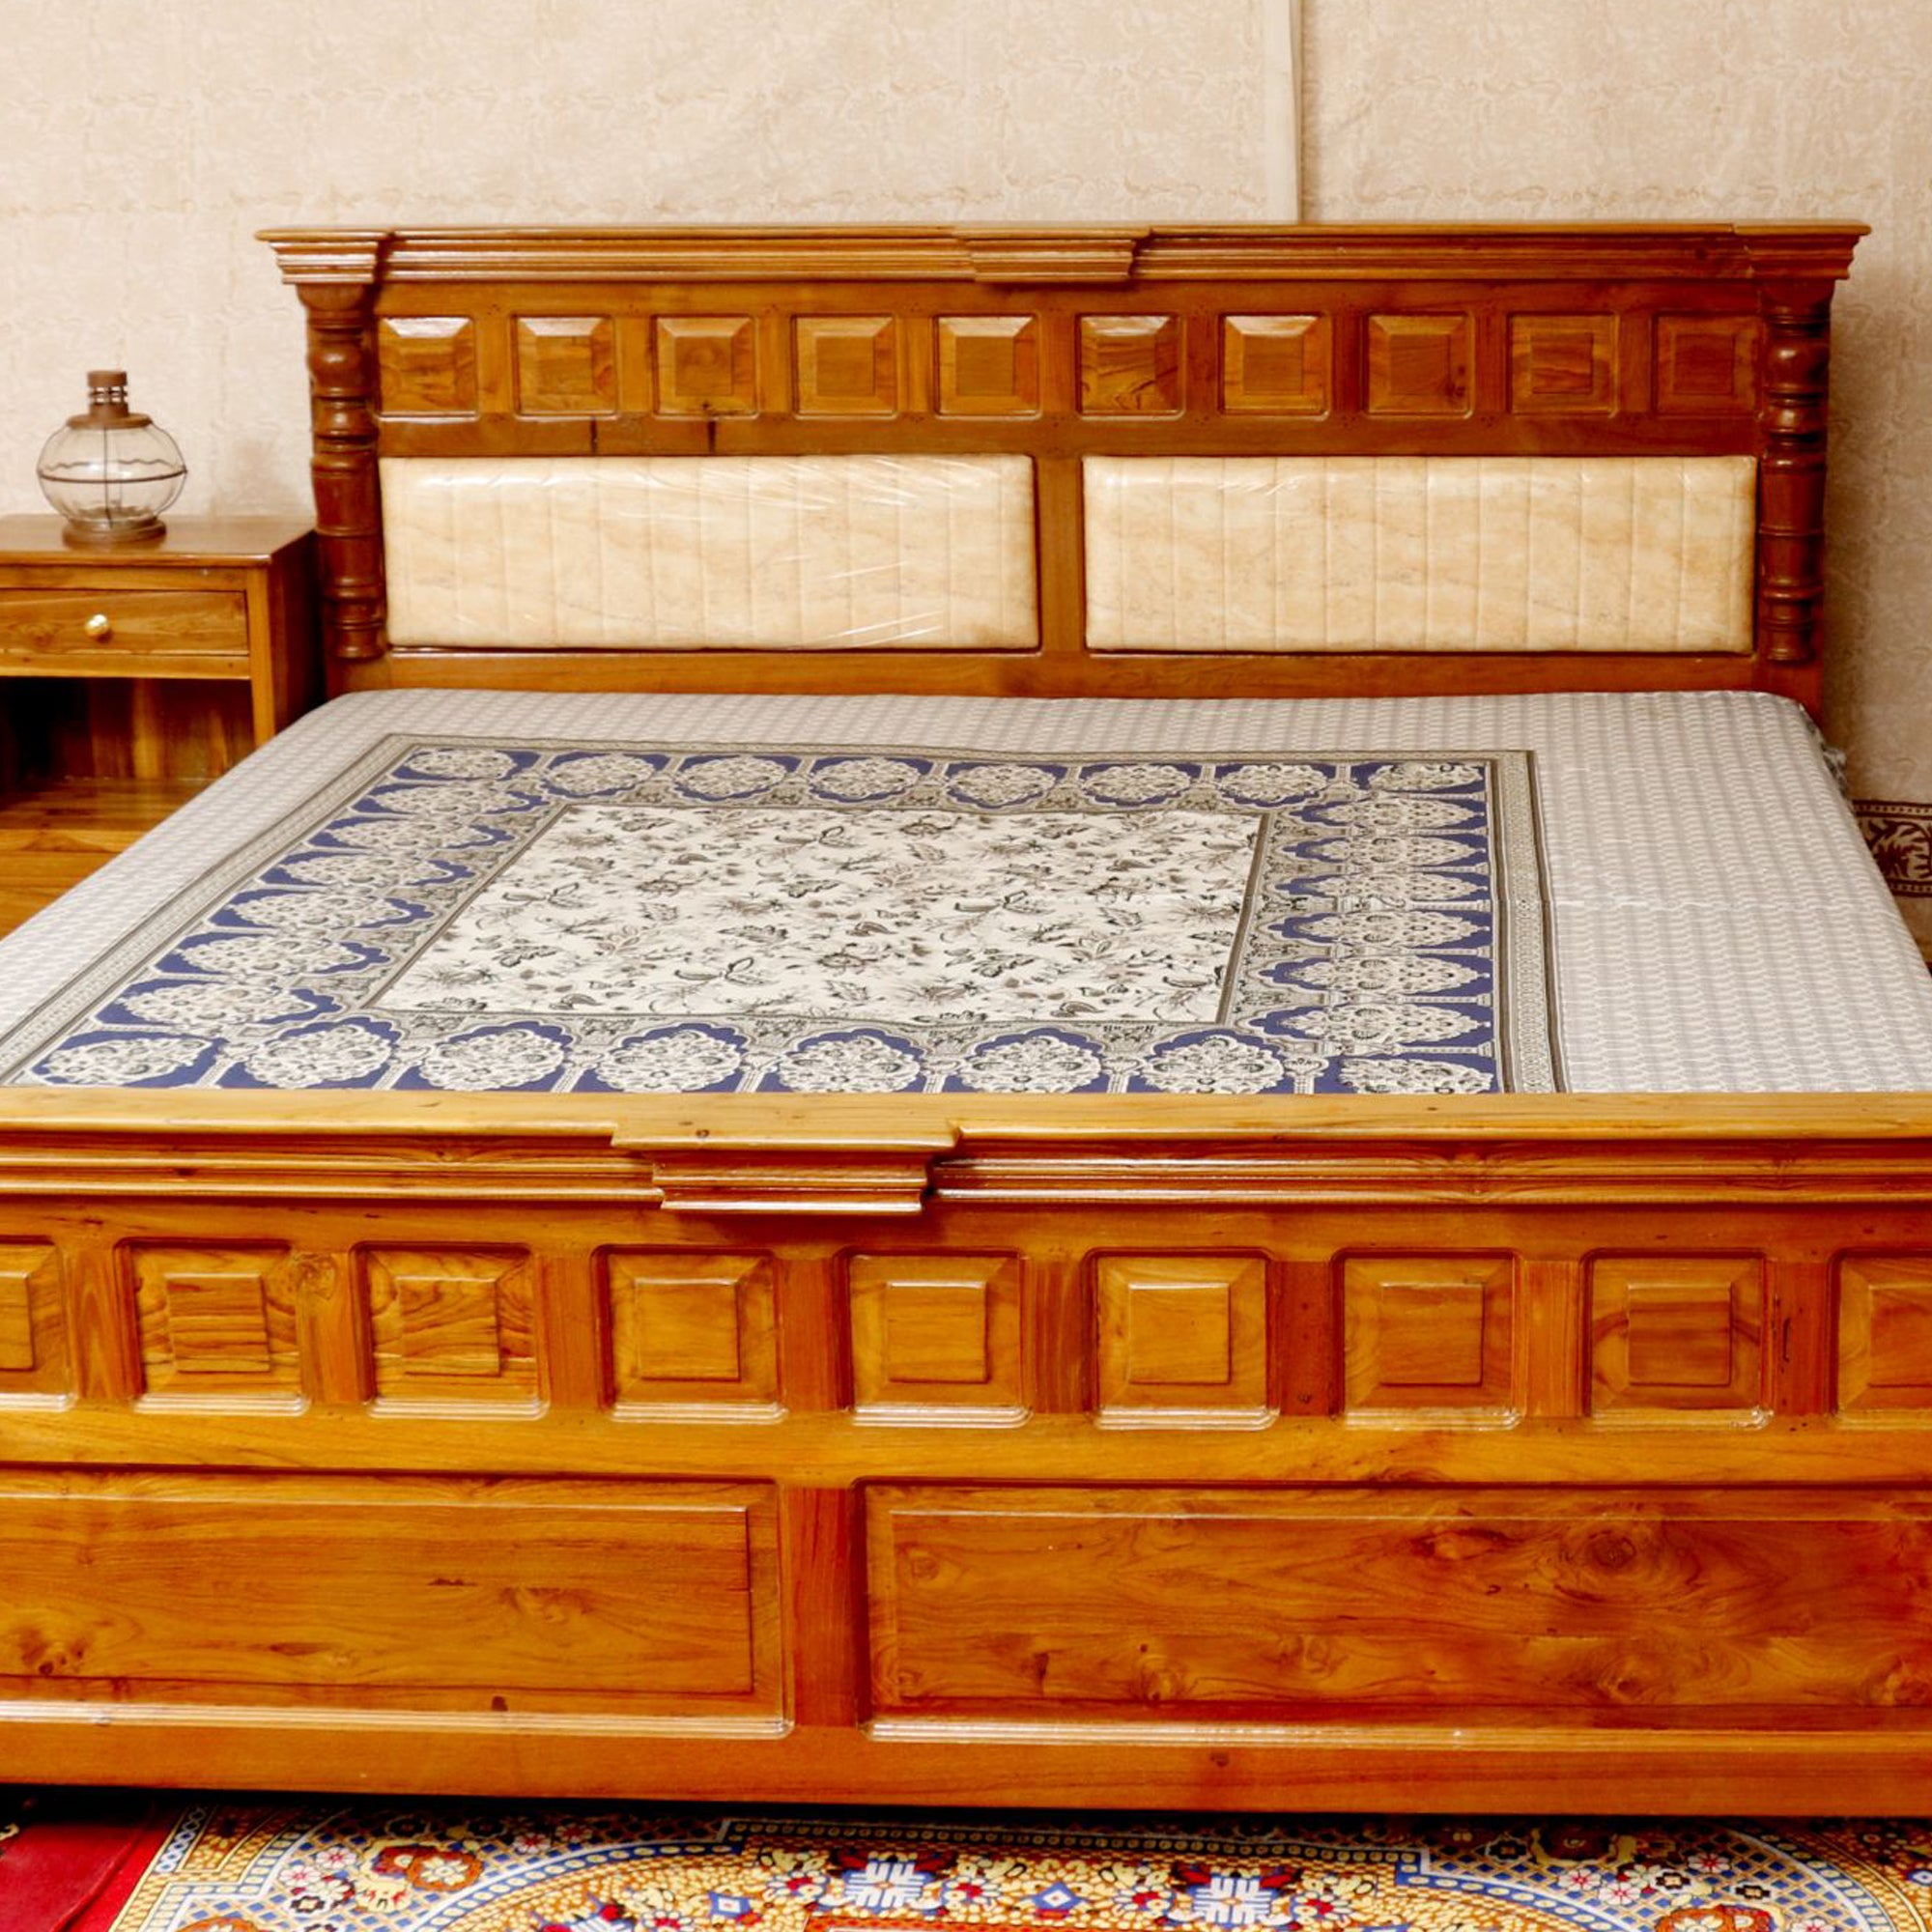 Teak Wood Bed in Light Brown Finish Bed